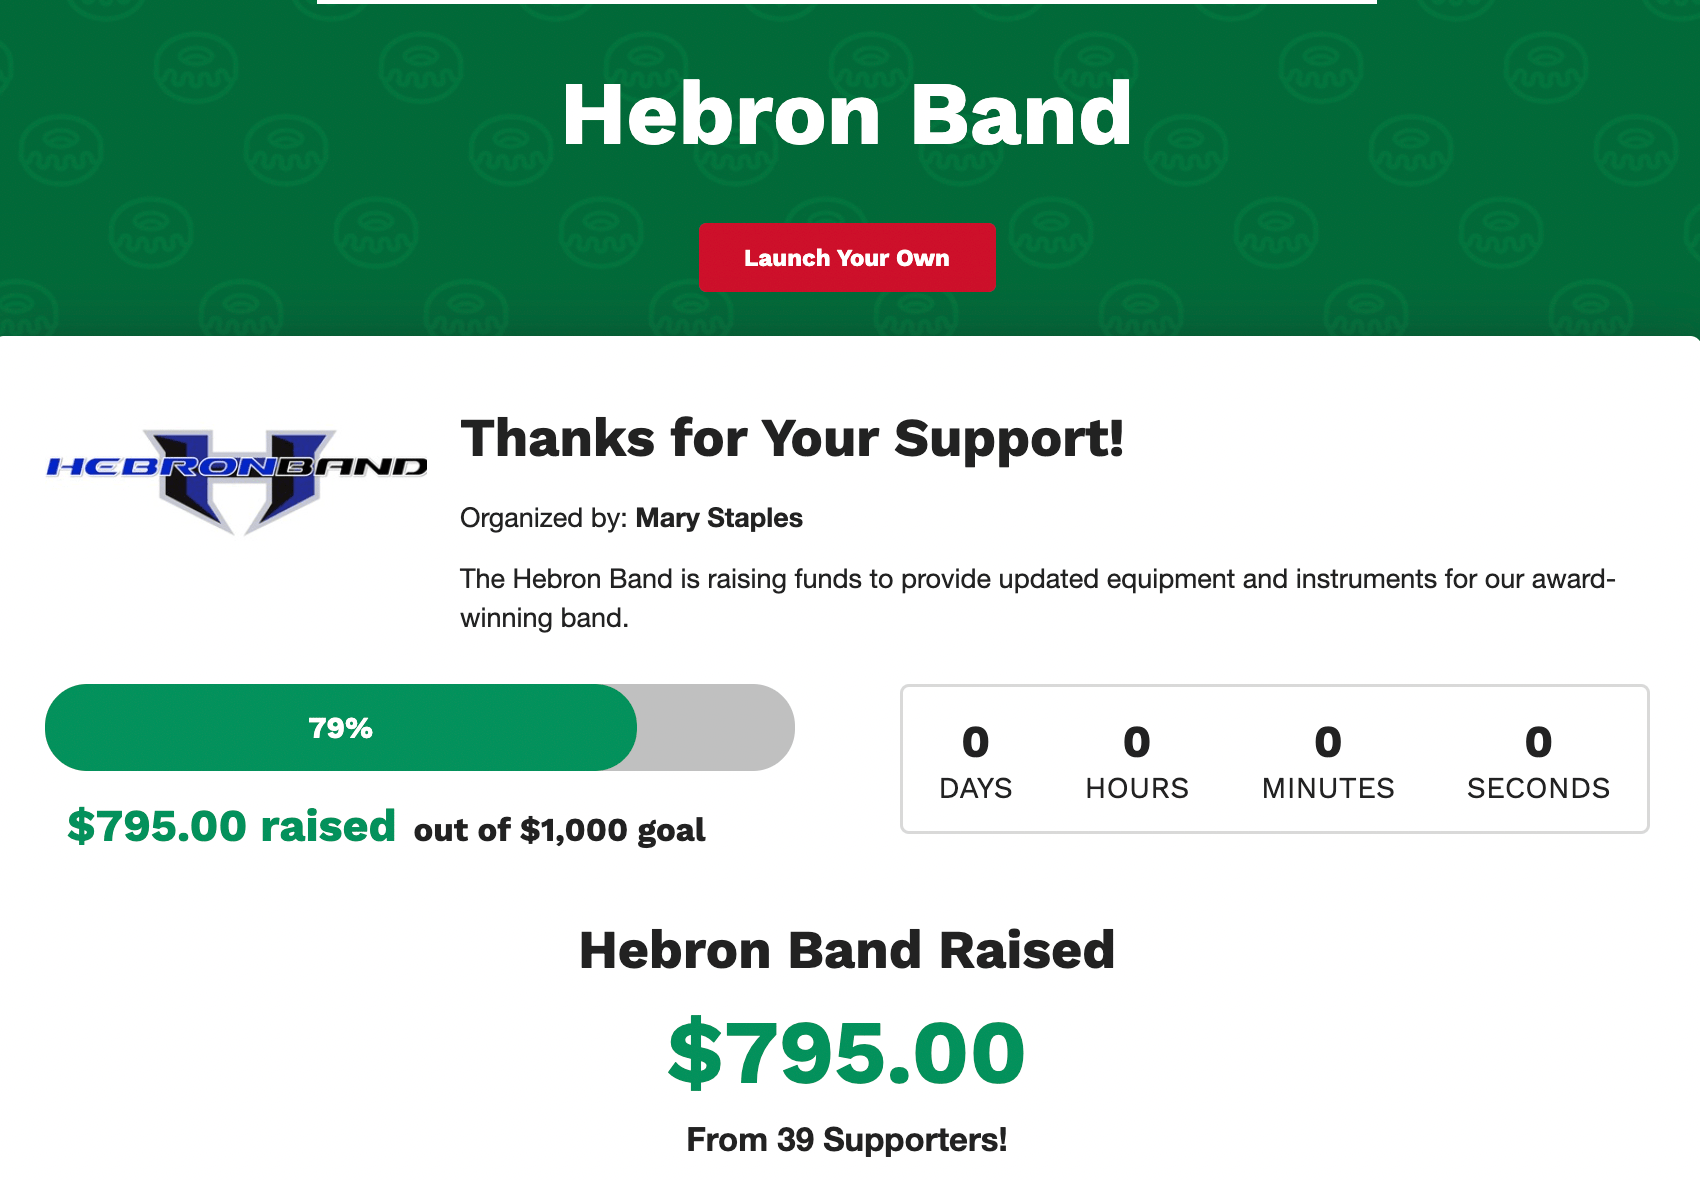 Hebron Band's Digital Dozens Fundraising Campaign Page